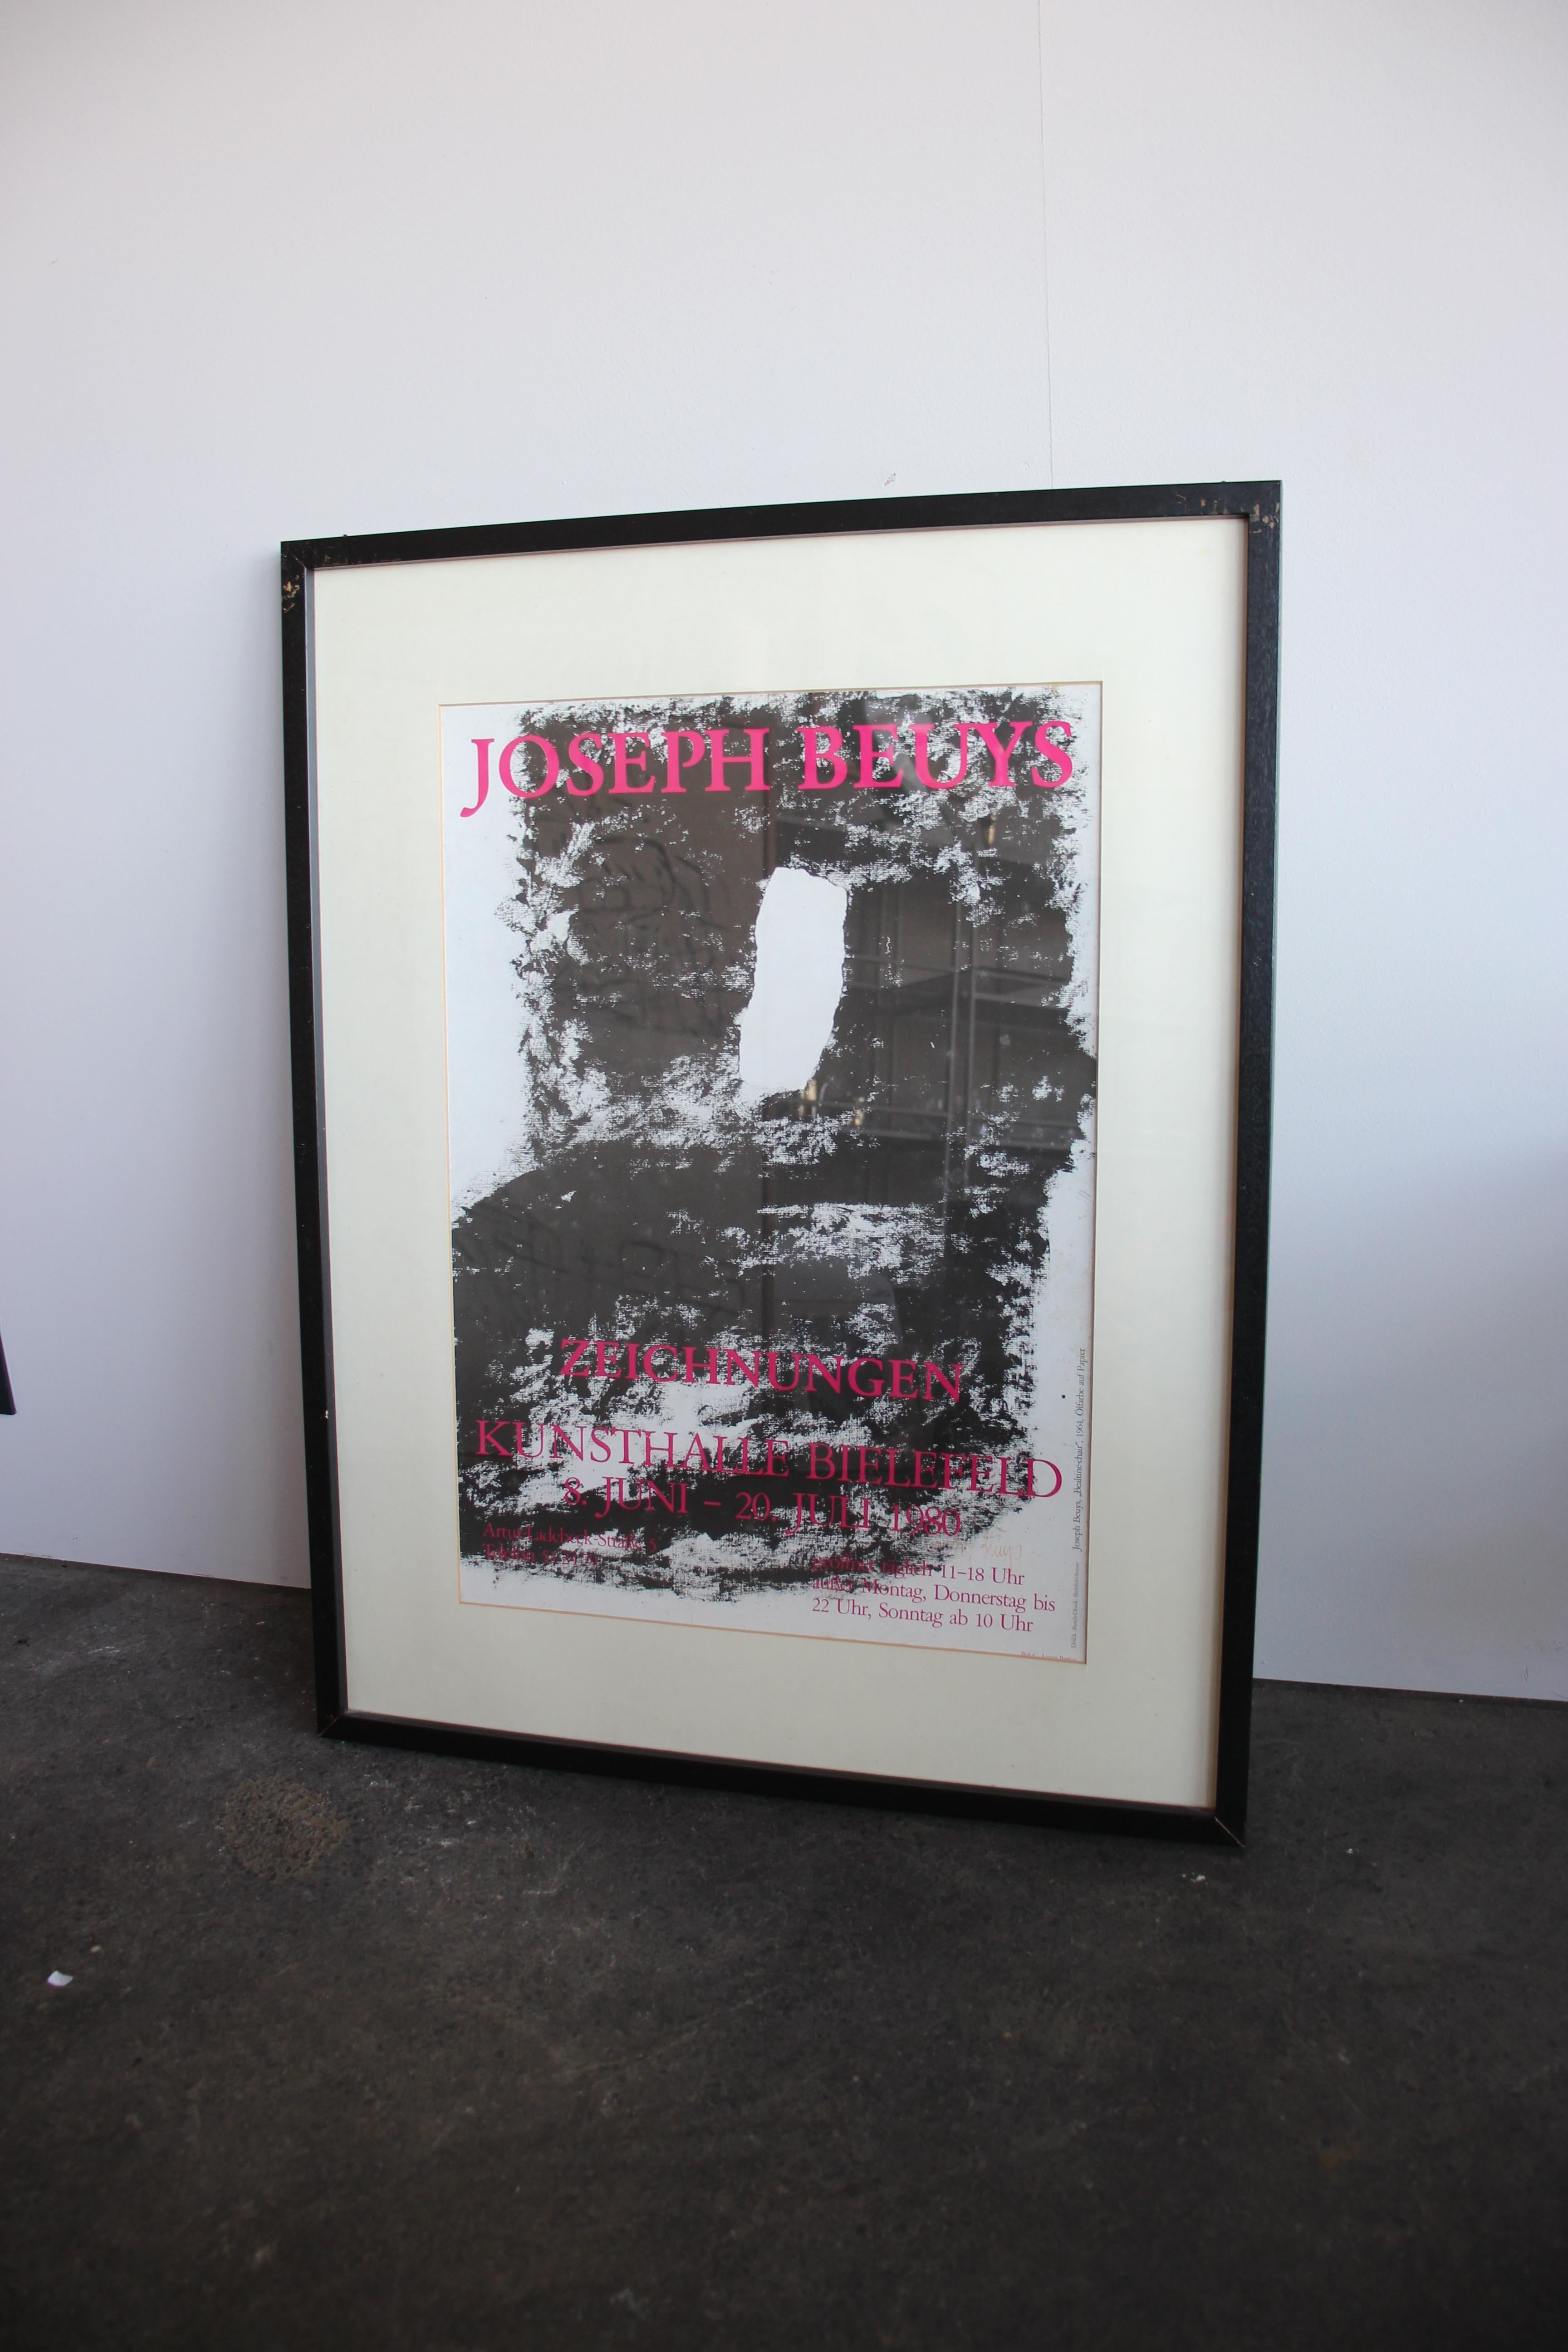 Original signed exhibition poster by Joseph Beuys 